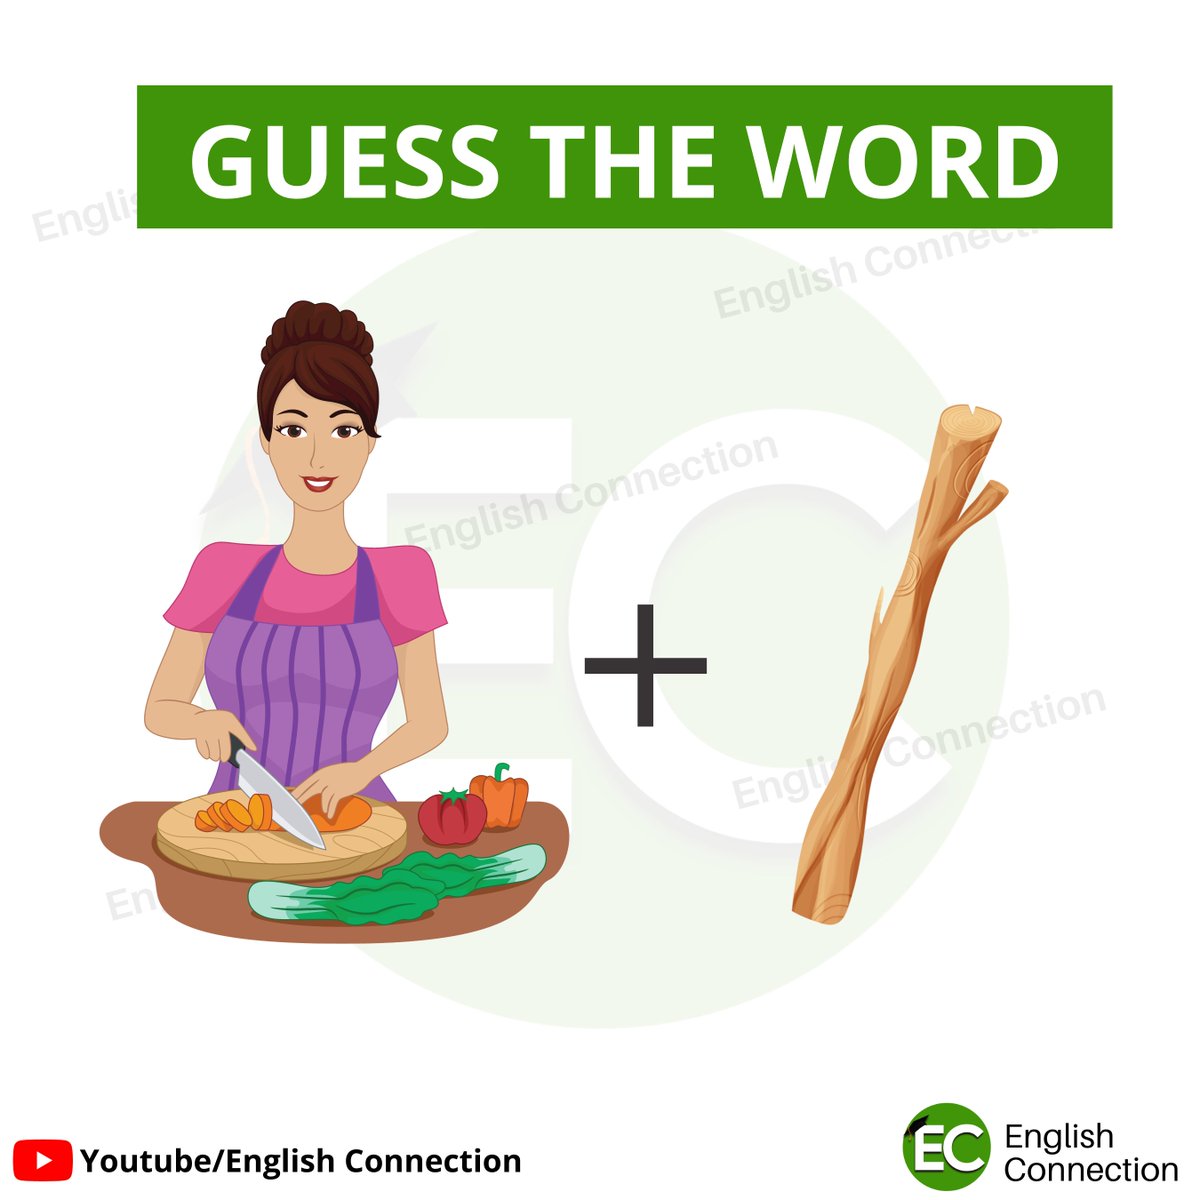 #GuessTheWord in 30 seconds. ⏱️